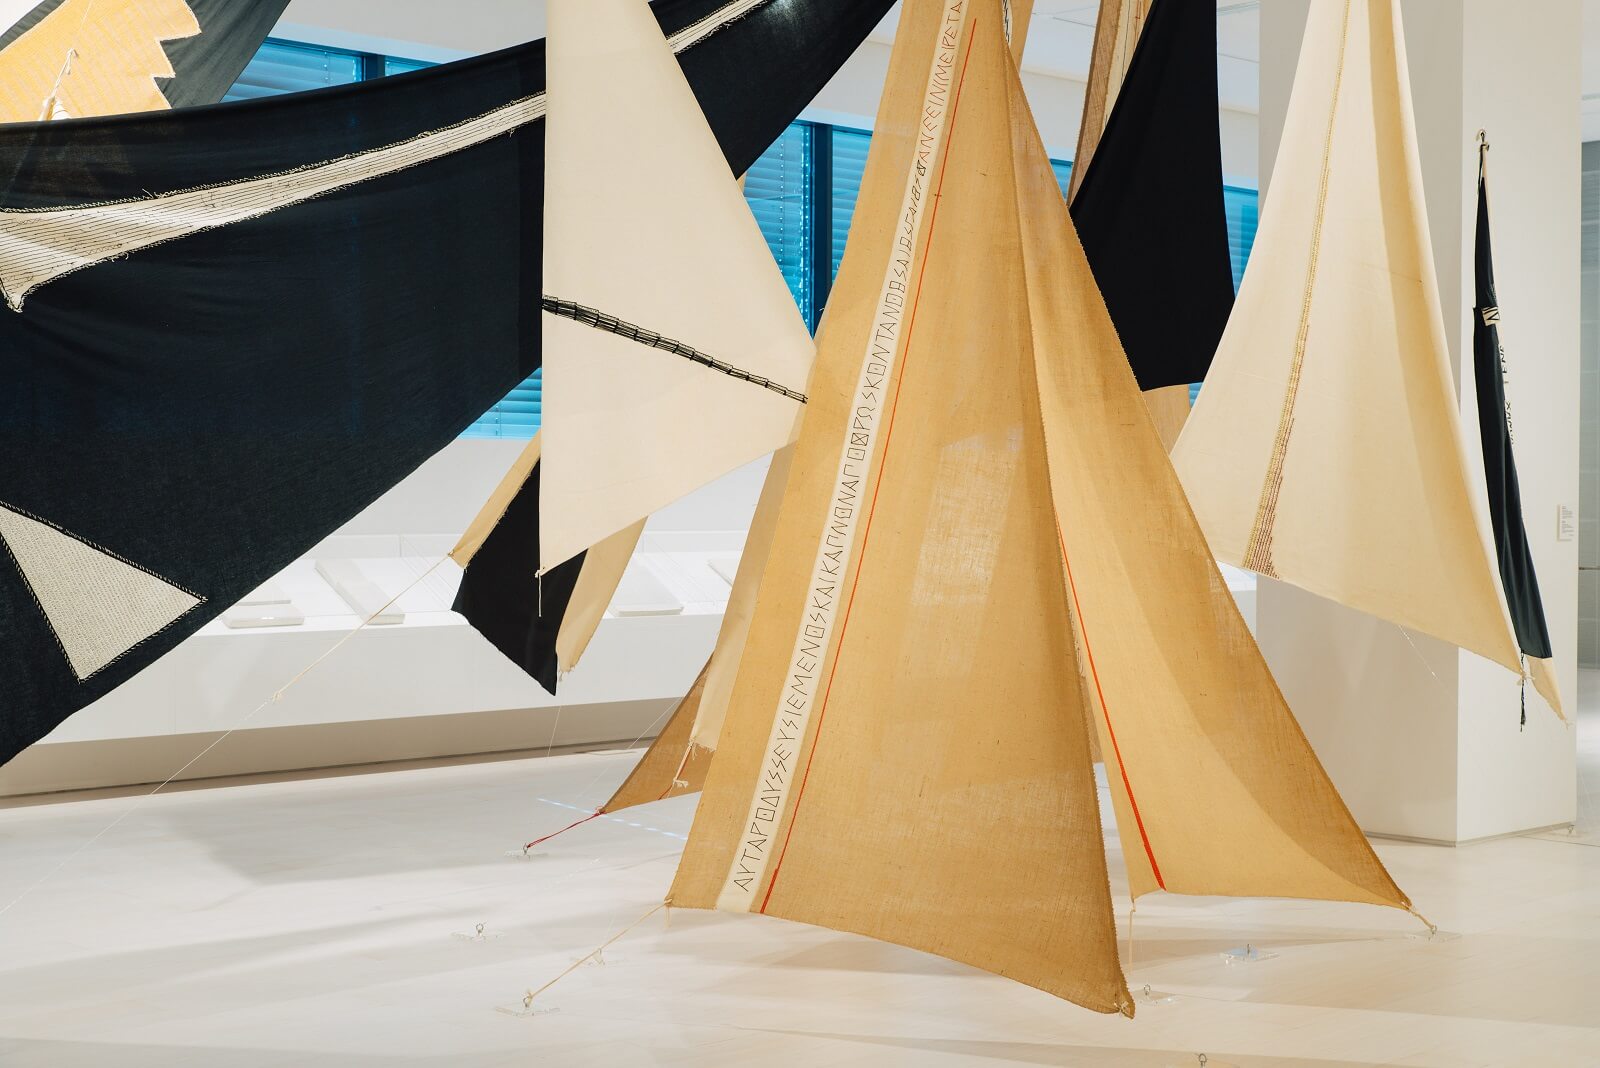 Sails by Bia Davou. Collection of the National Museum of Contemporary Art Athens, donated by Zafos Xagoraris, 2002. | Photo: Thomas Gravanis 